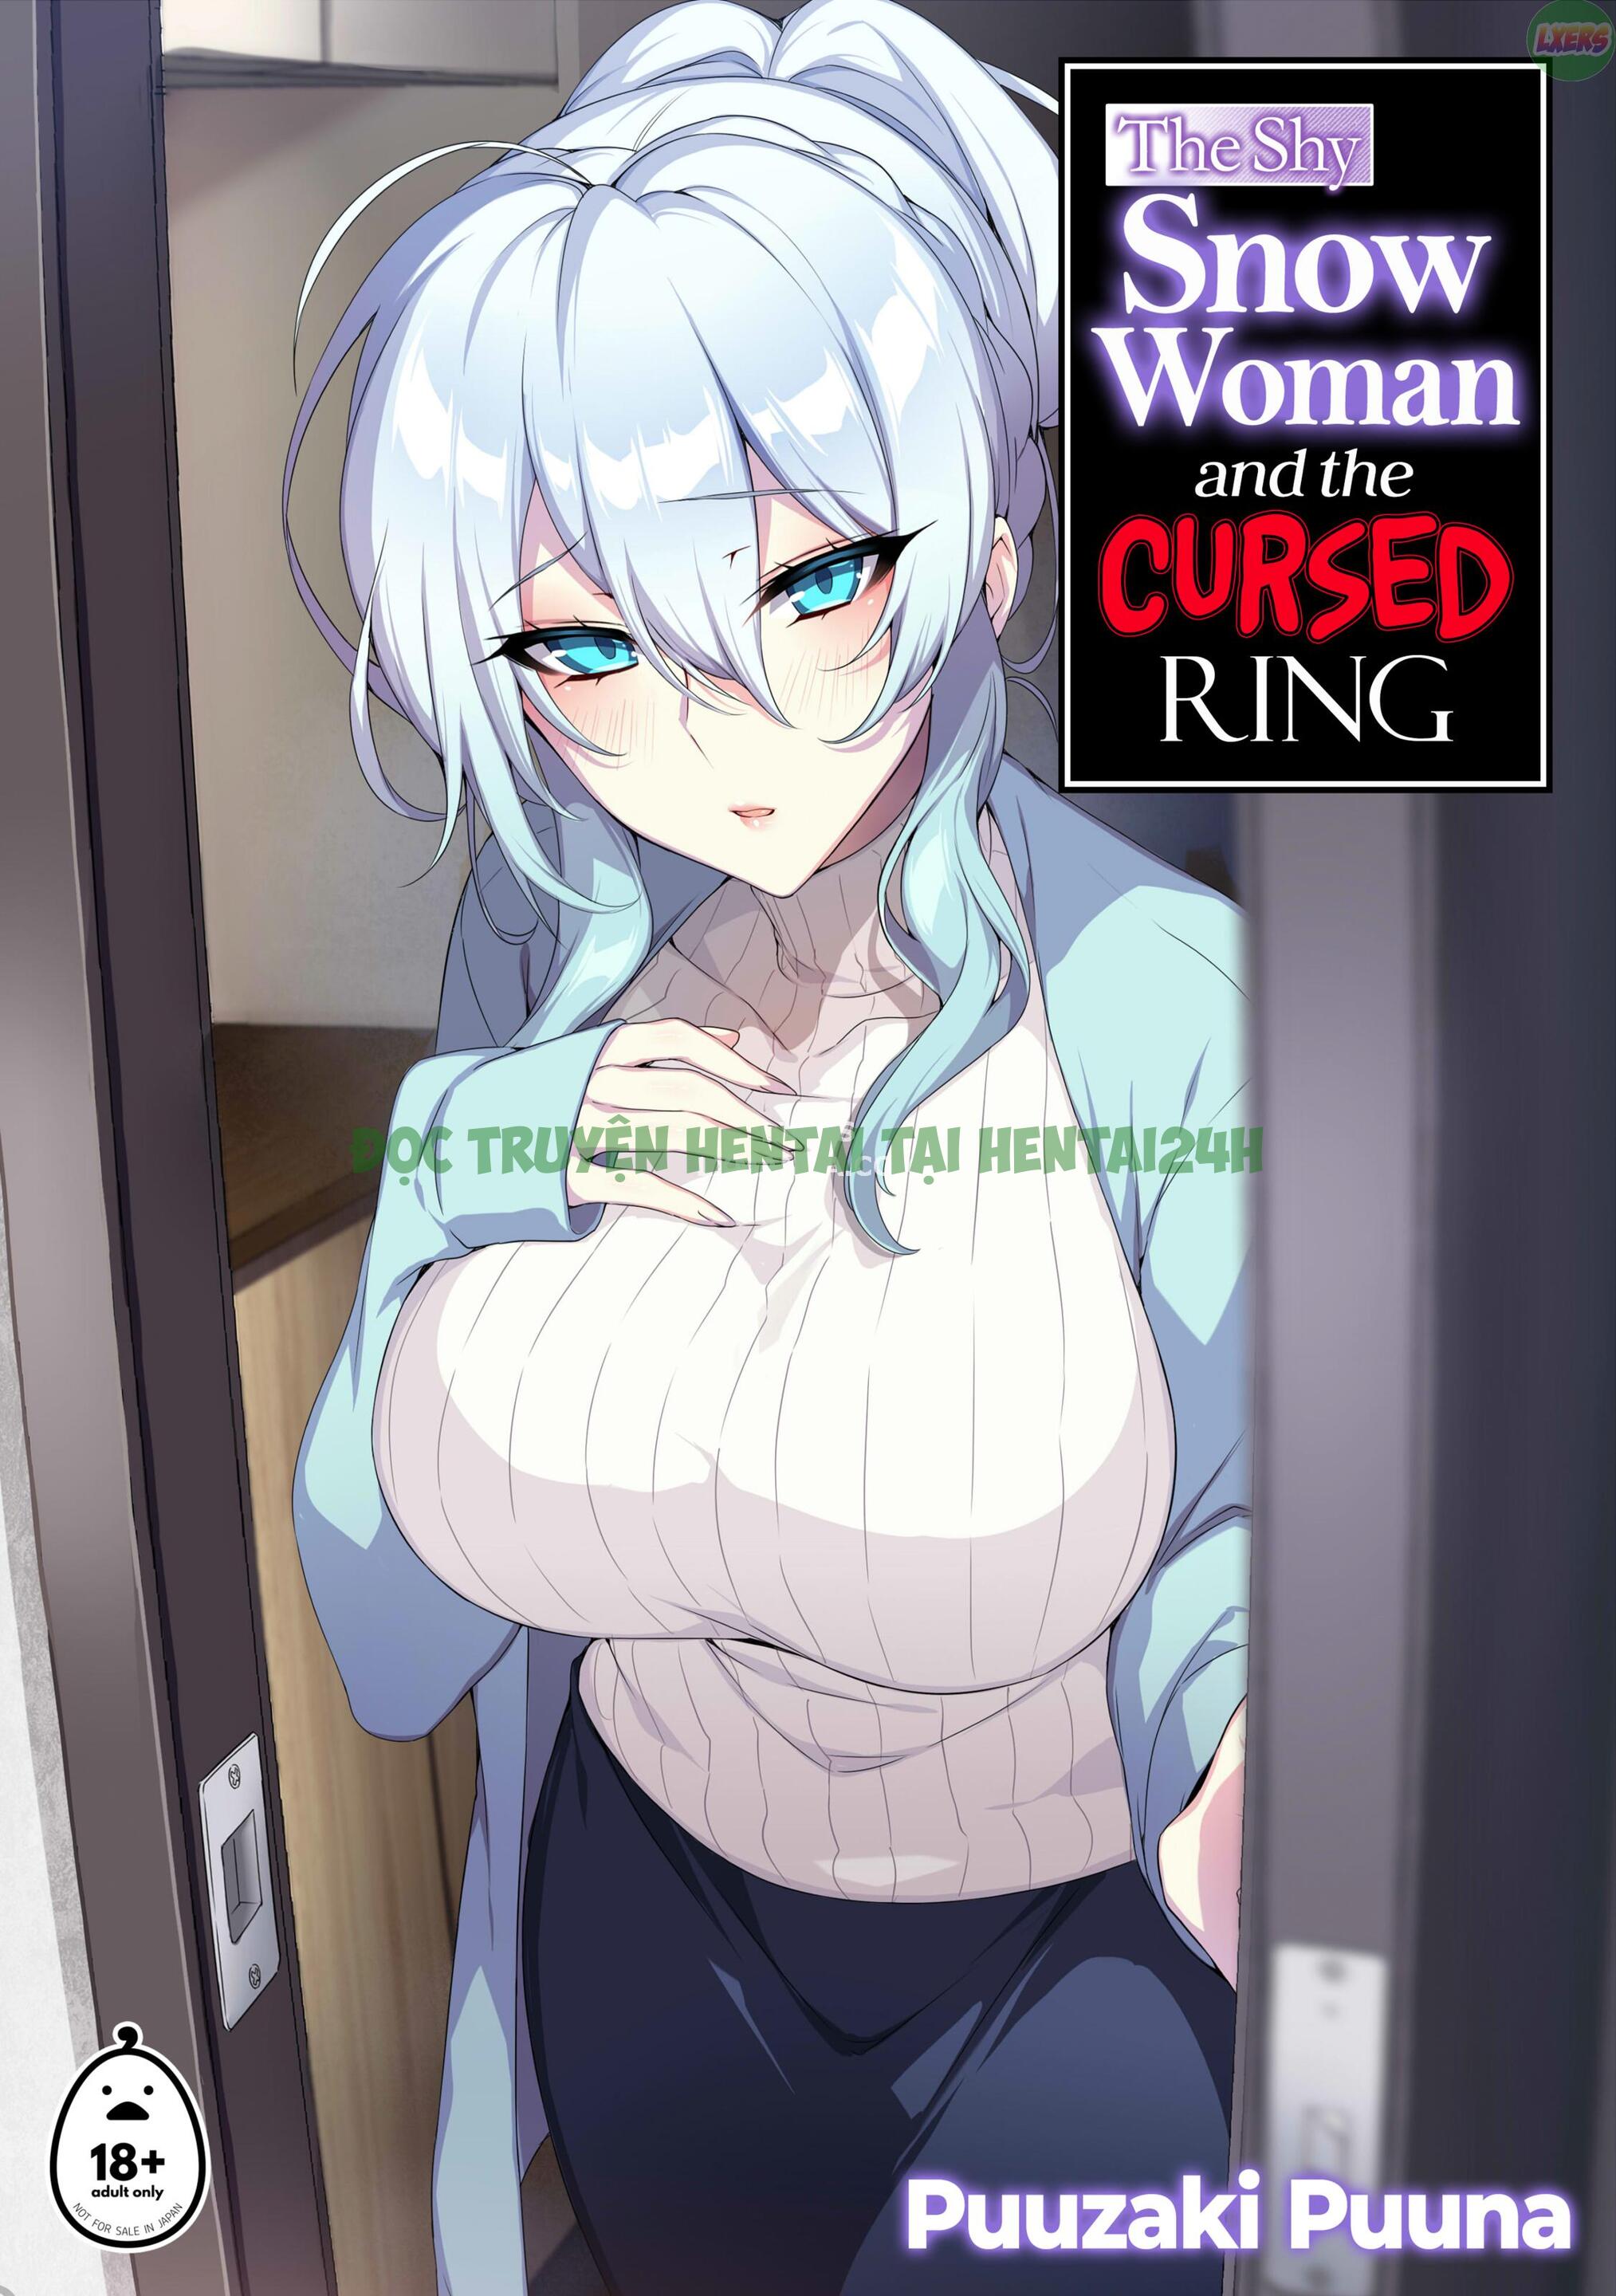 Xem ảnh The Shy Snow Woman and the Cursed Ring - Chapter 1 - 0 - Hentai24h.Tv